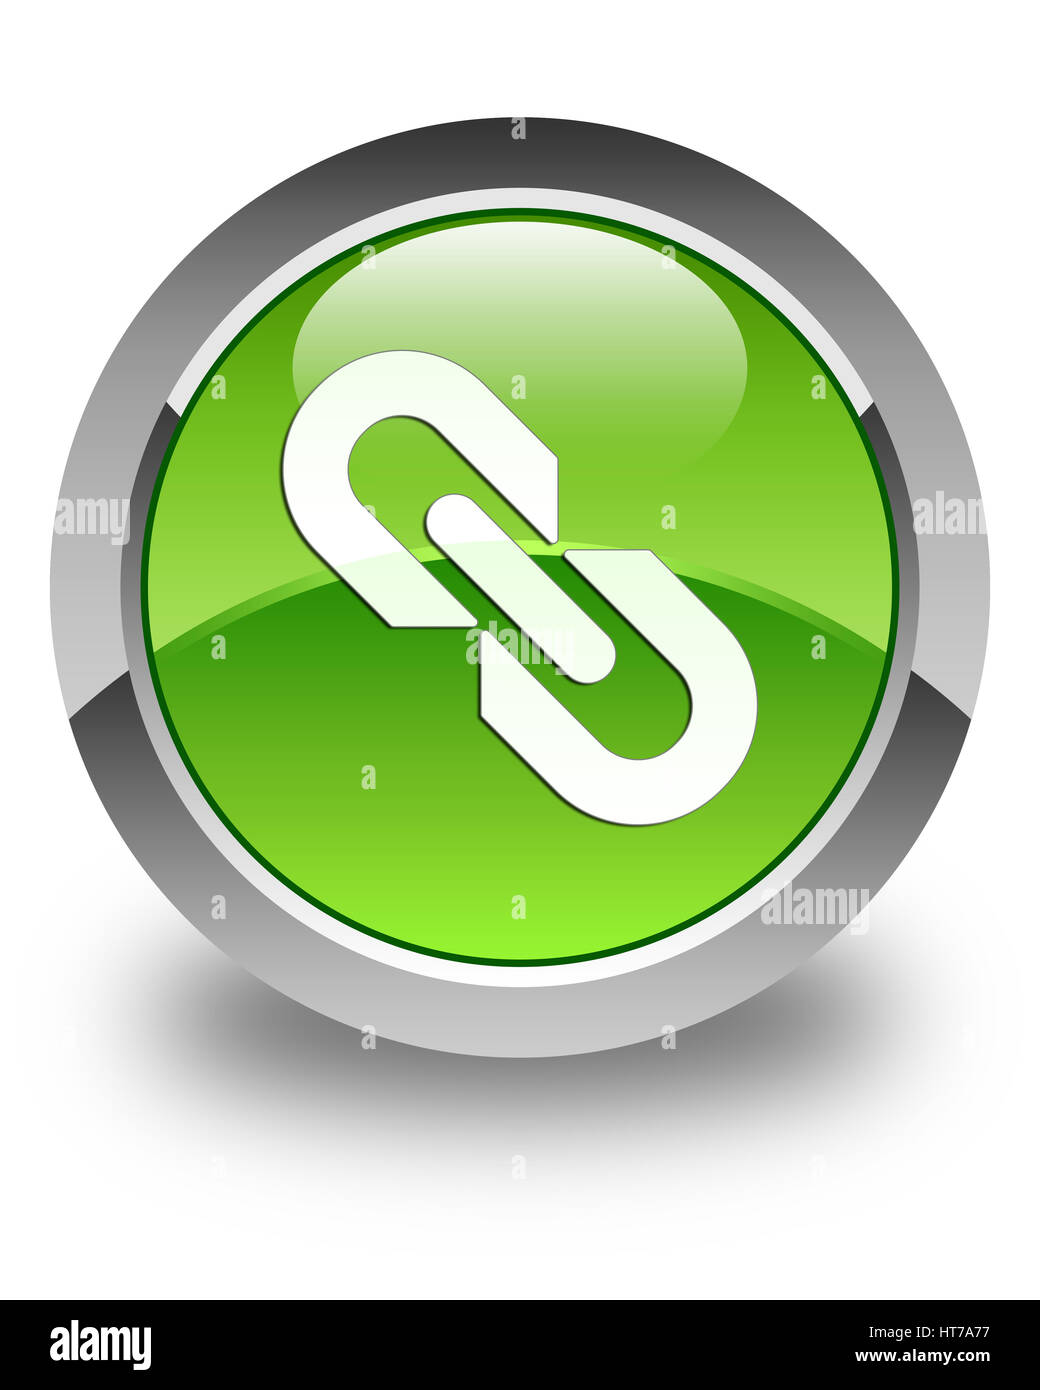 Link icon isolated on glossy green round button abstract illustration Stock Photo